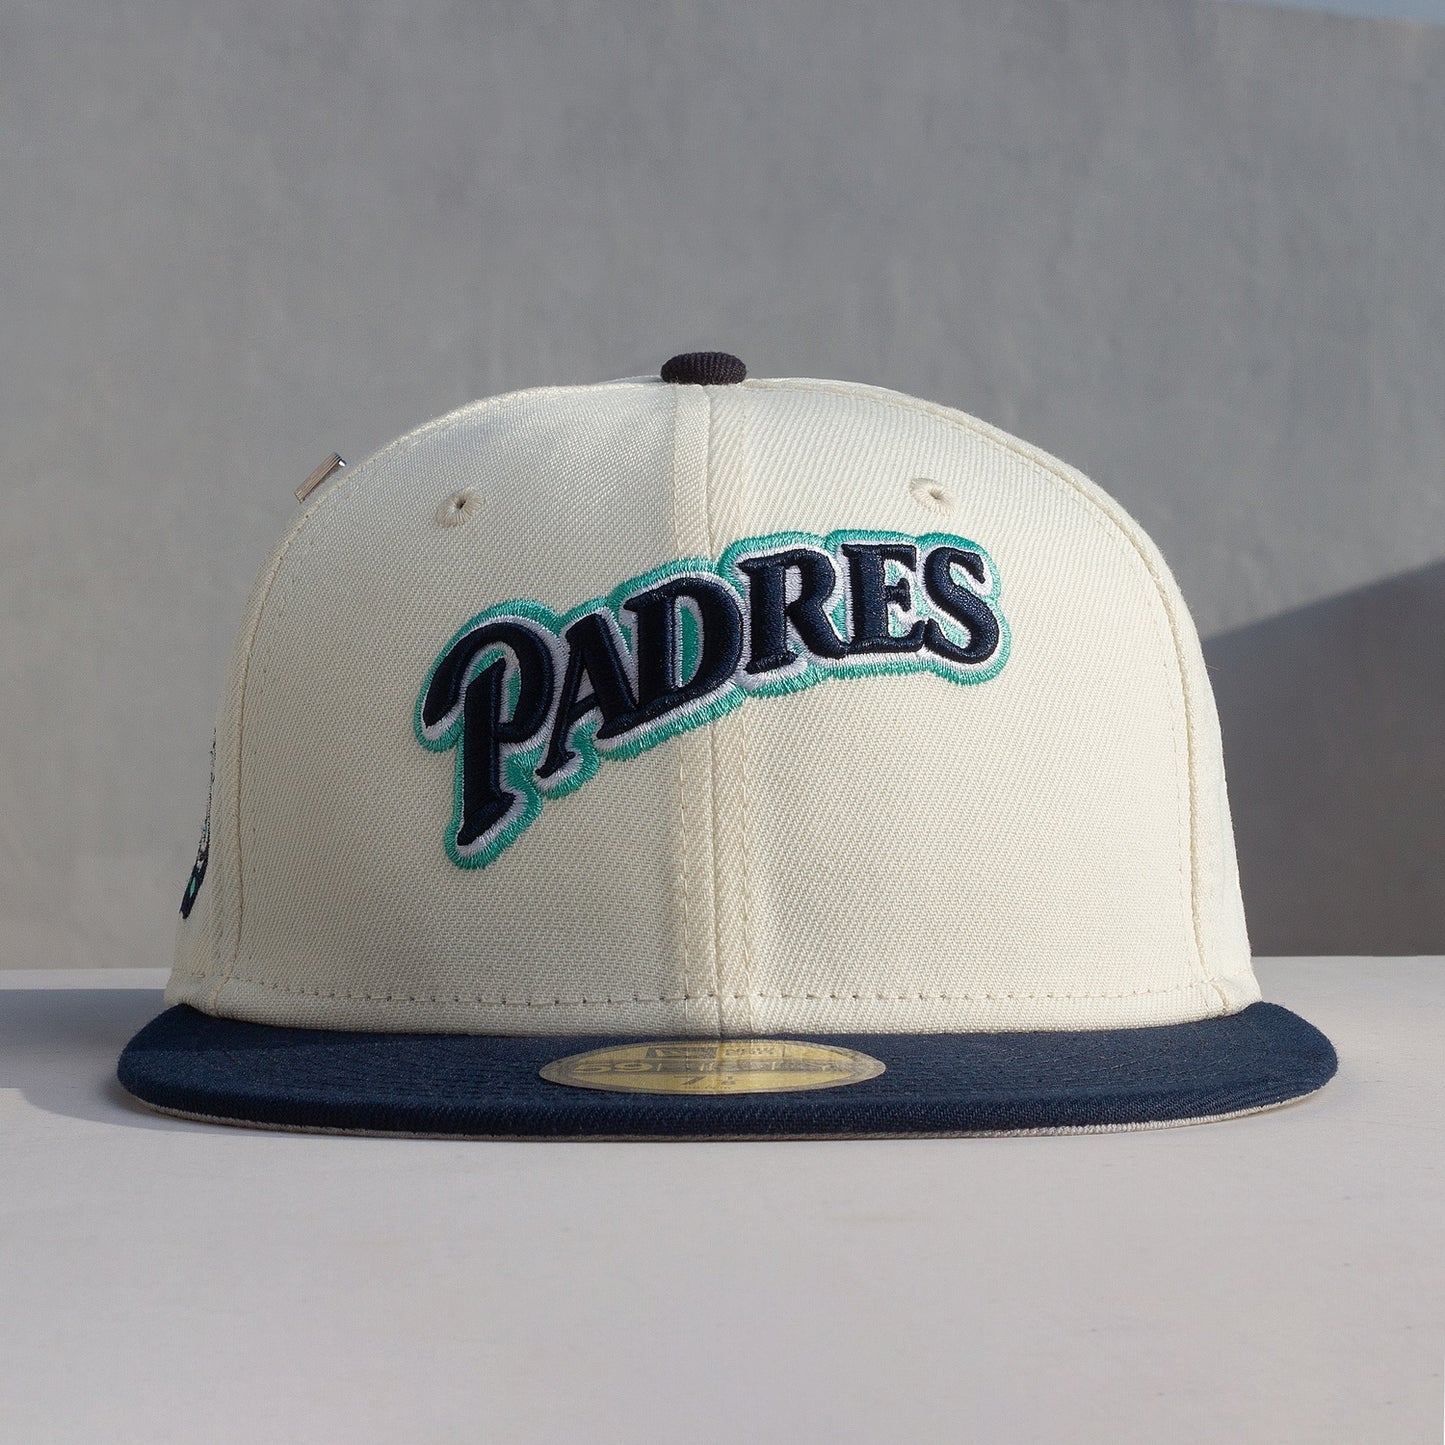 New Era SAN DIEGO PADRES MLB WORLD SERIES 1998 SIDEPATCH 9FOR